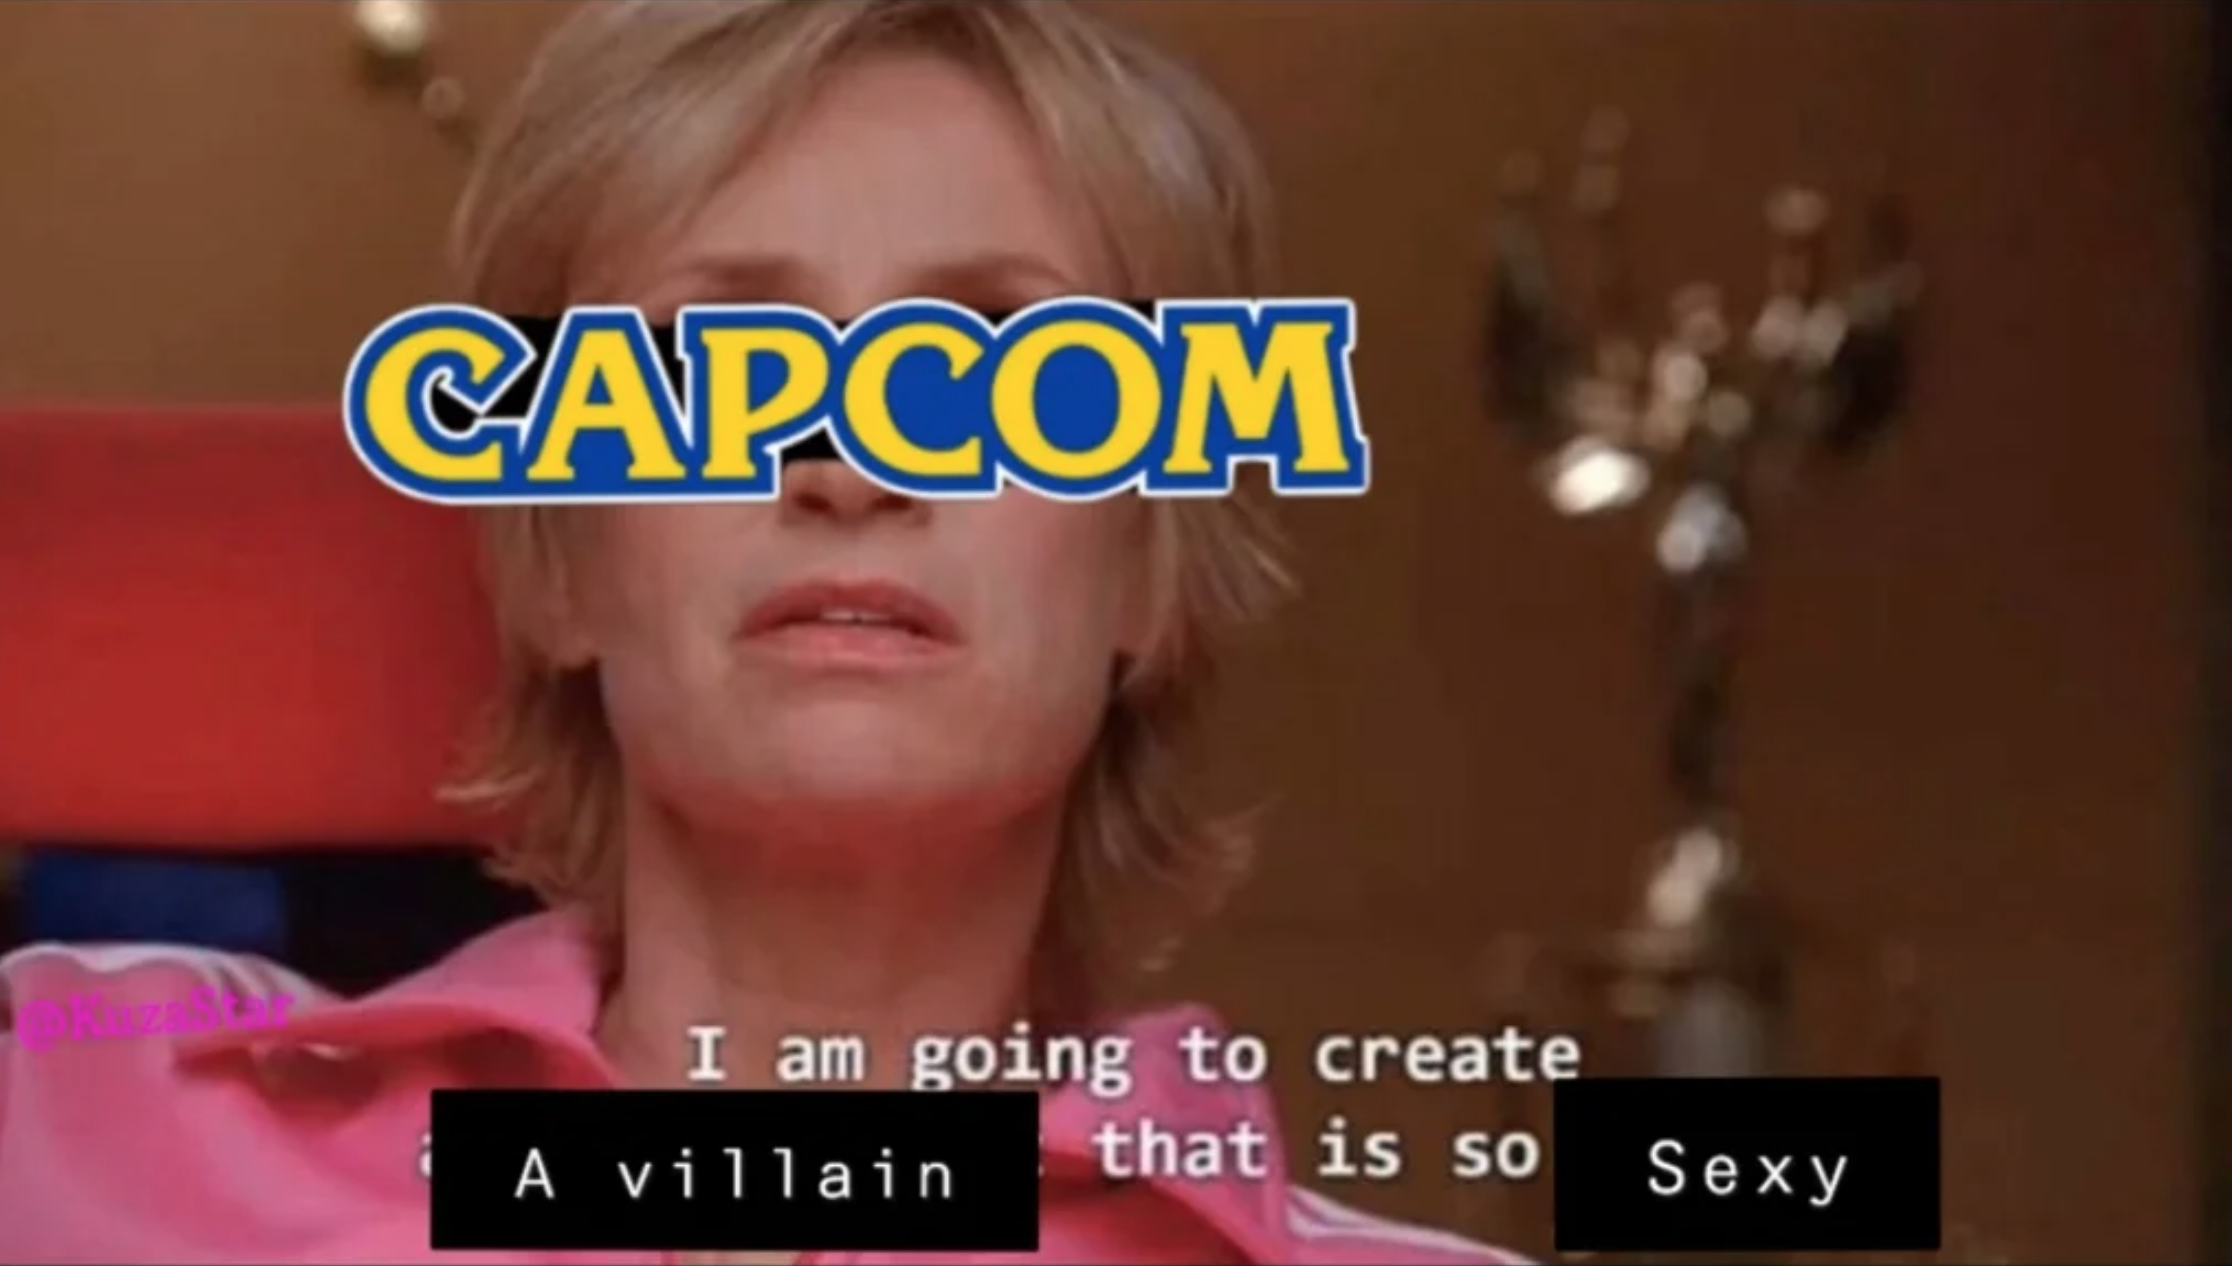 blond - Capcom I am going to create that is so A villain Sexy